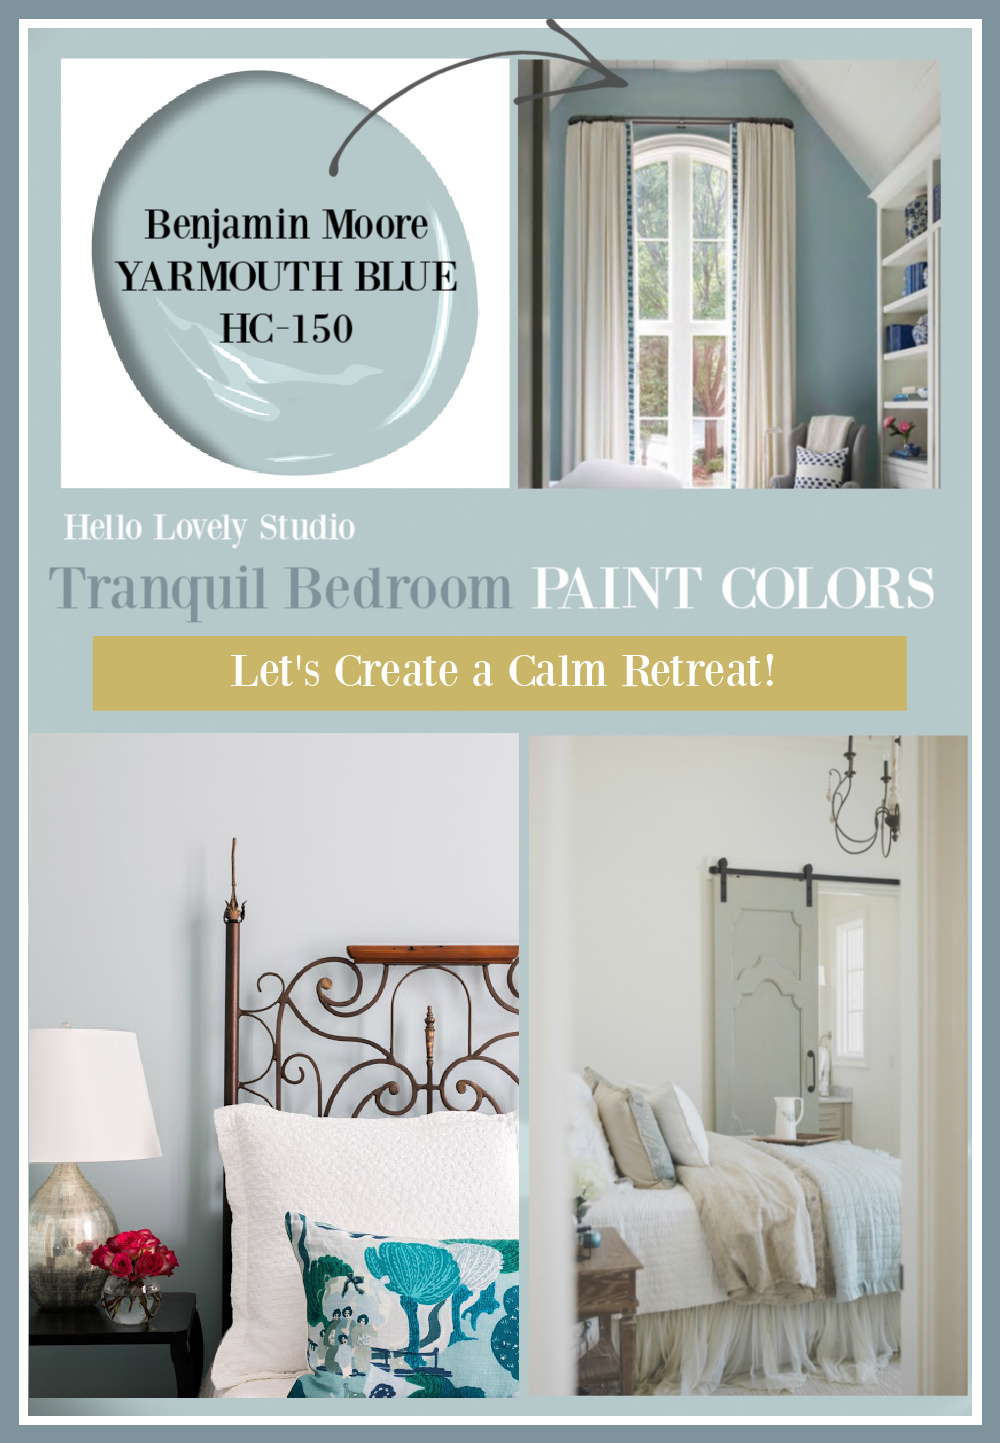 Beyond the Walls: Selecting paint colors for the interior and exterior of  your home | Preservation Resource Center of New Orleans